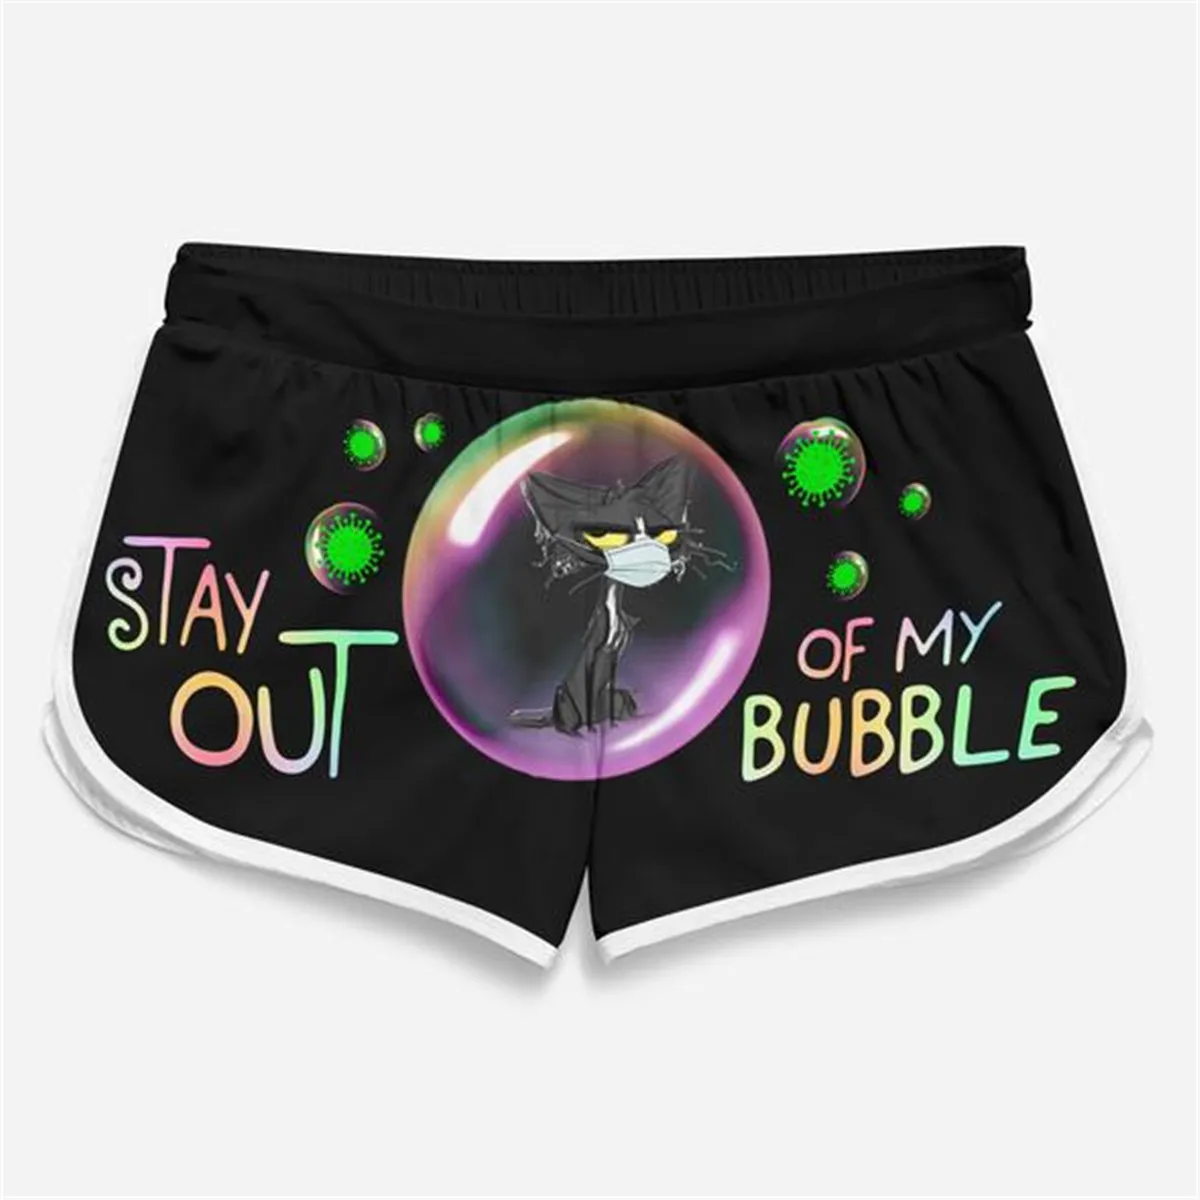 PLstar Cosmos Summer Casual Shorts Stop Staring At My Camel Toe 3D Printed Trousers Girl For Women Shorts Beach Shorts nike shorts women